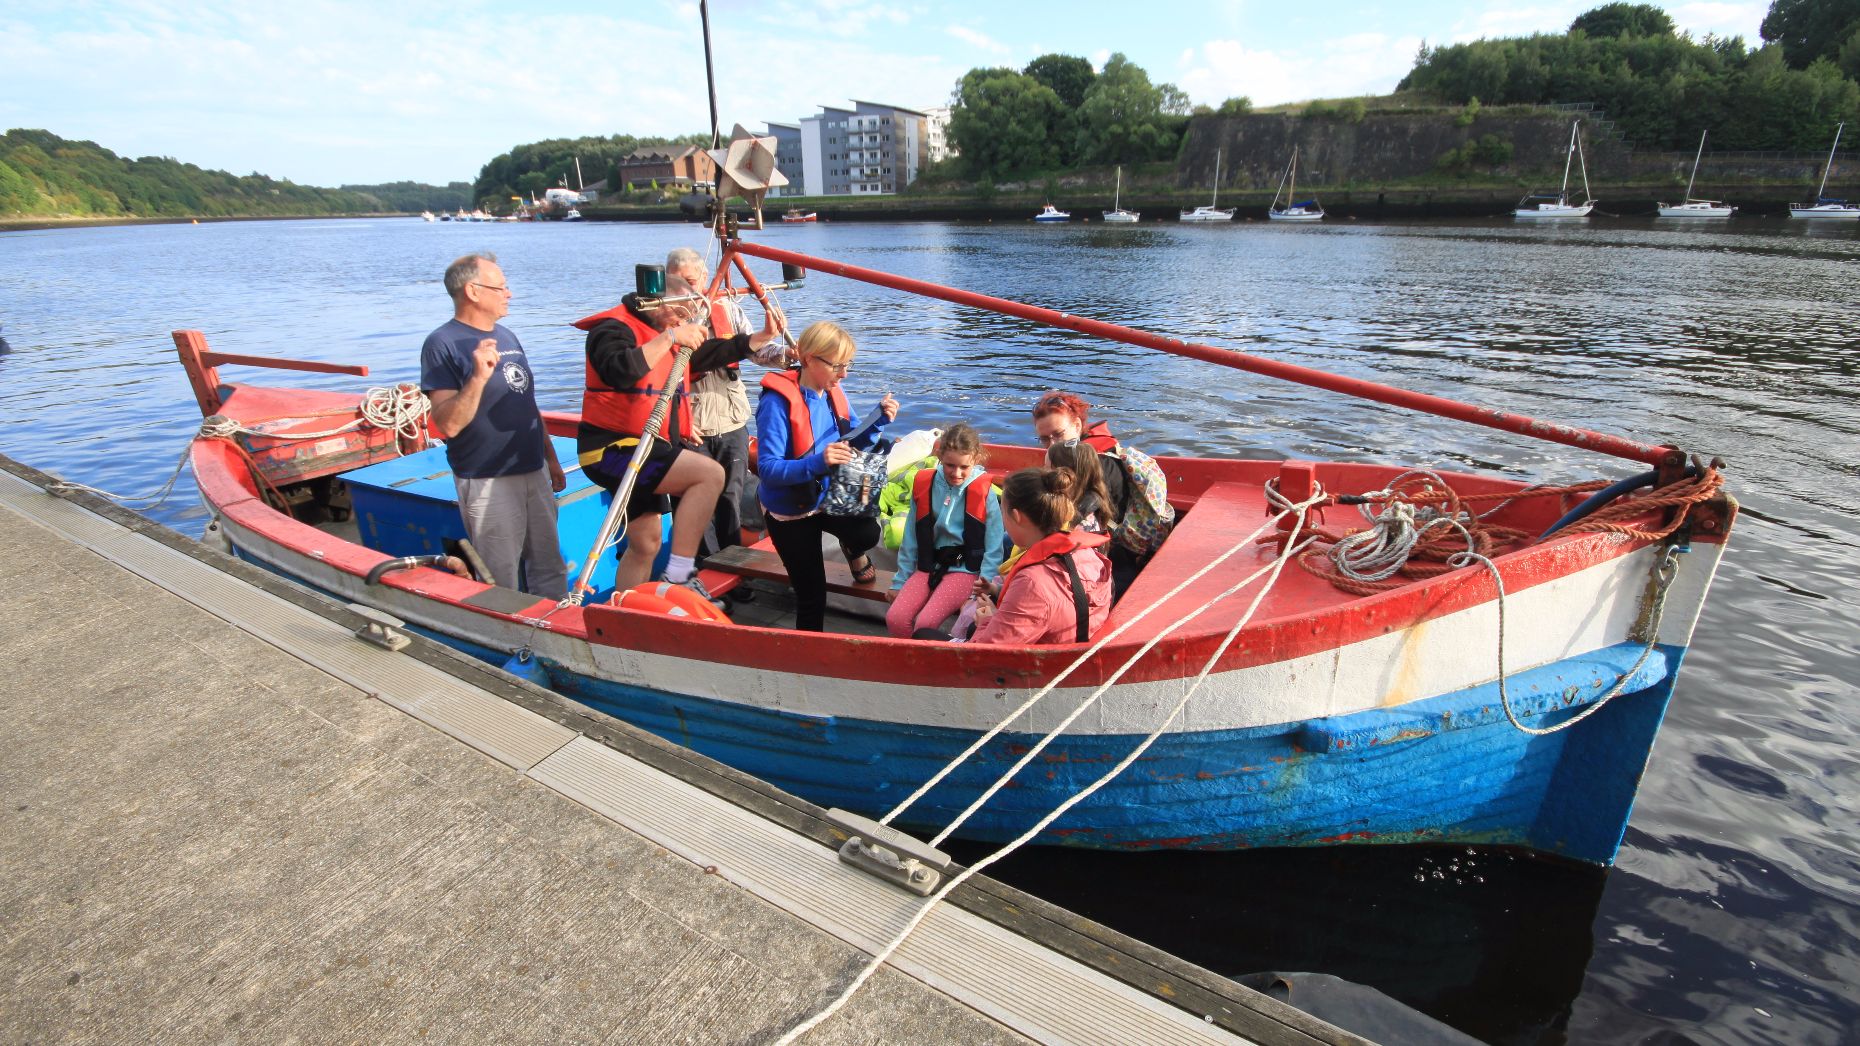 Tyne boat trips, St. Peter's Fete, St. Peter's Marina, Newcastle upon Tyne